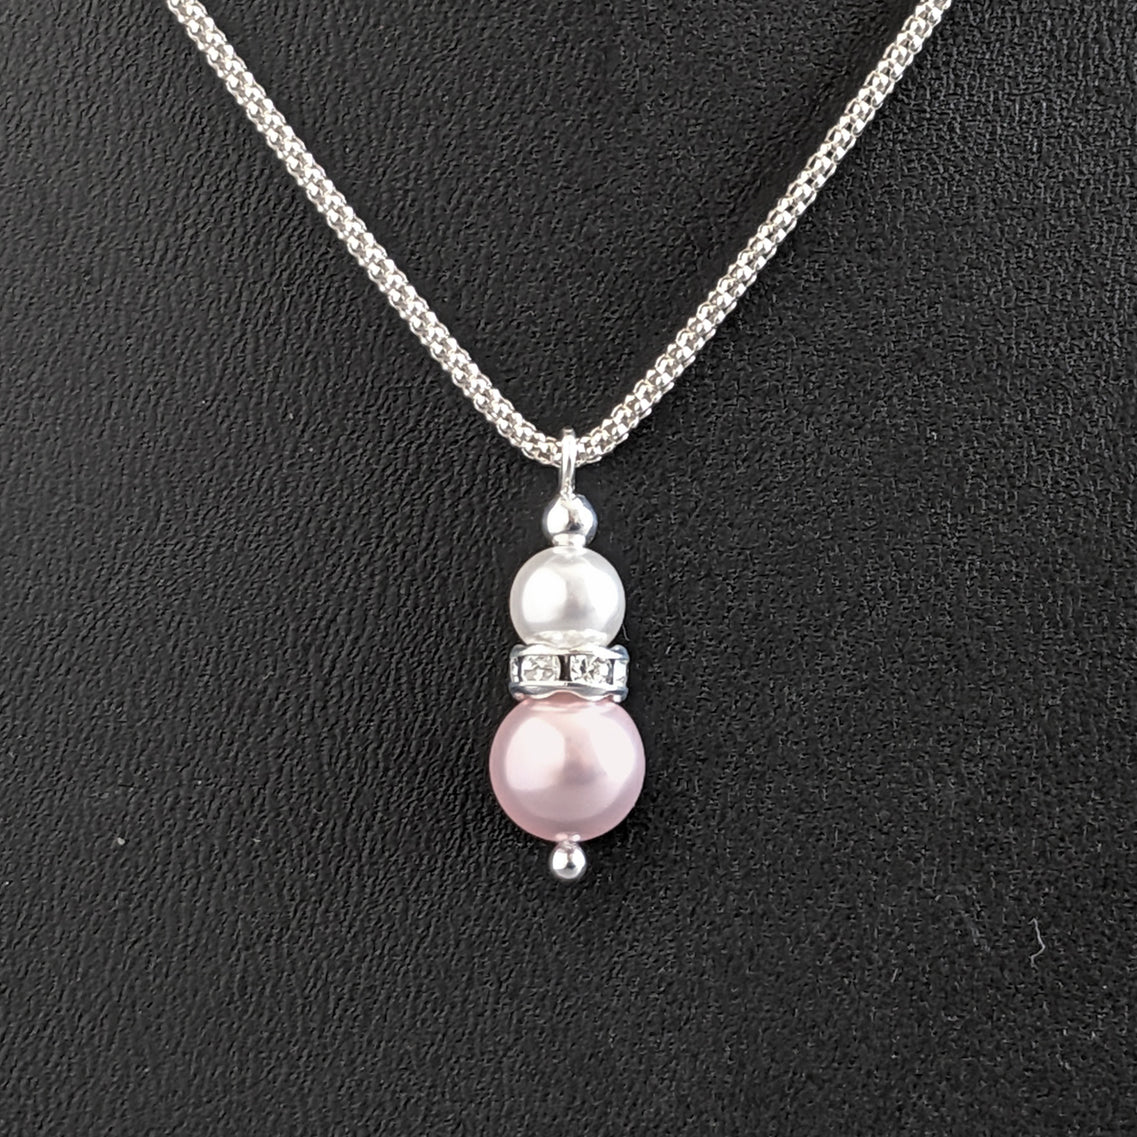 Light pink pearl pendant necklace